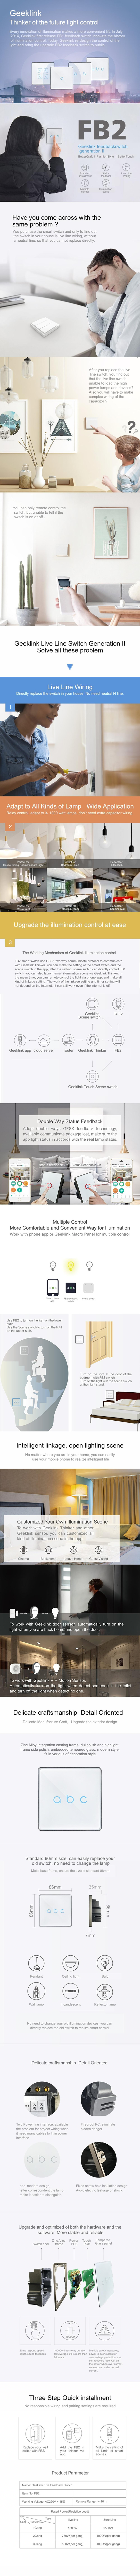 Geeklink FB2 3 gang way remote home automation WiFi light touch electric switch app control wireless power on off switch